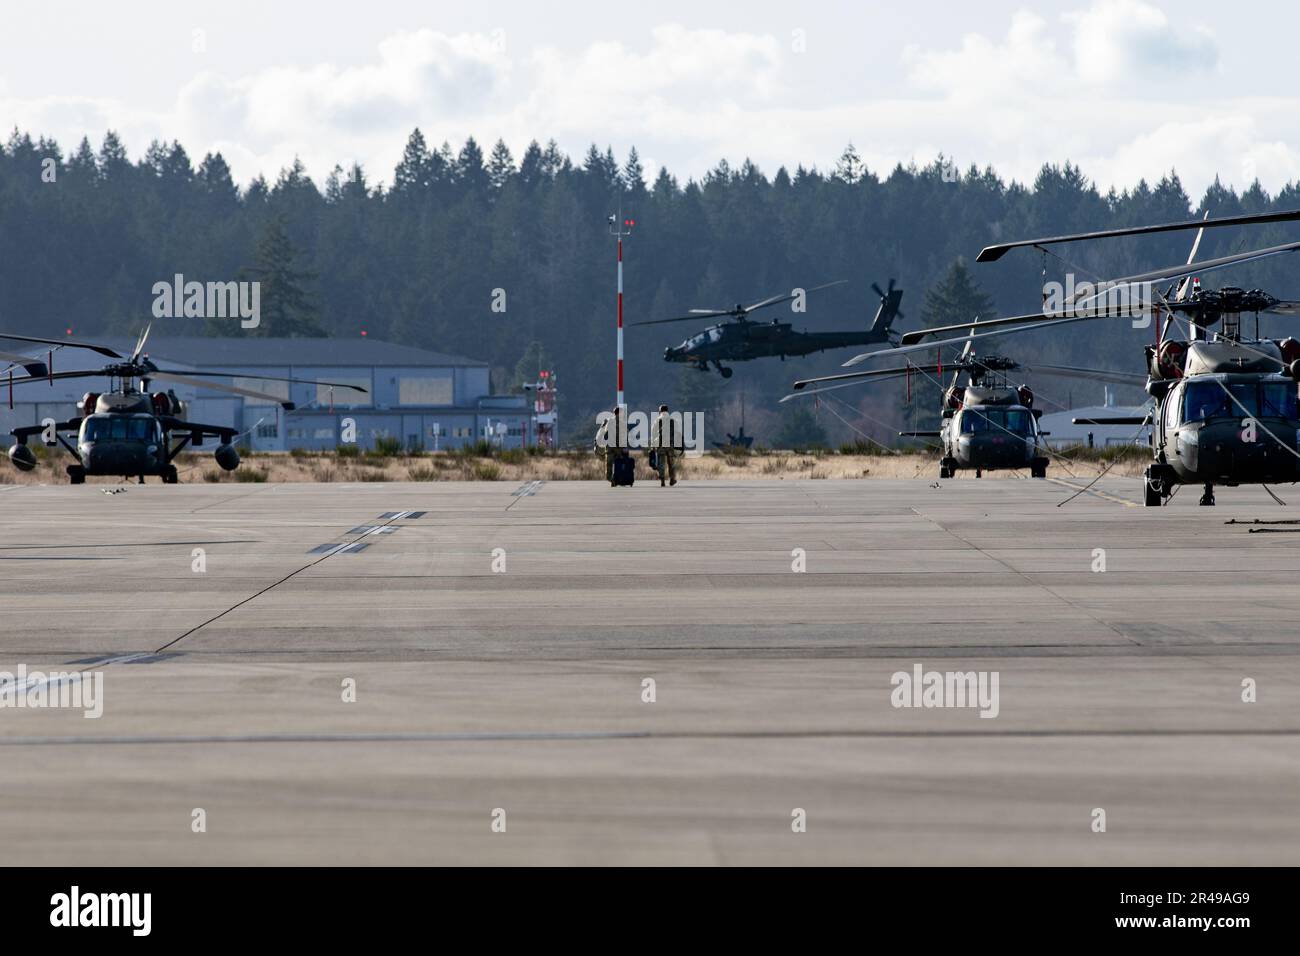 An aircrew assigned to 2-158 Assault Helicopter Battalion, 16th Combat Aviation Brigade walks between a row of parked UH-60M Black Hawk Helicopters at Joint Base Lewis-McChord, Wash. on Feb. 8, 2023. An AH-64E Apache helicopter is flying in the background. Stock Photo